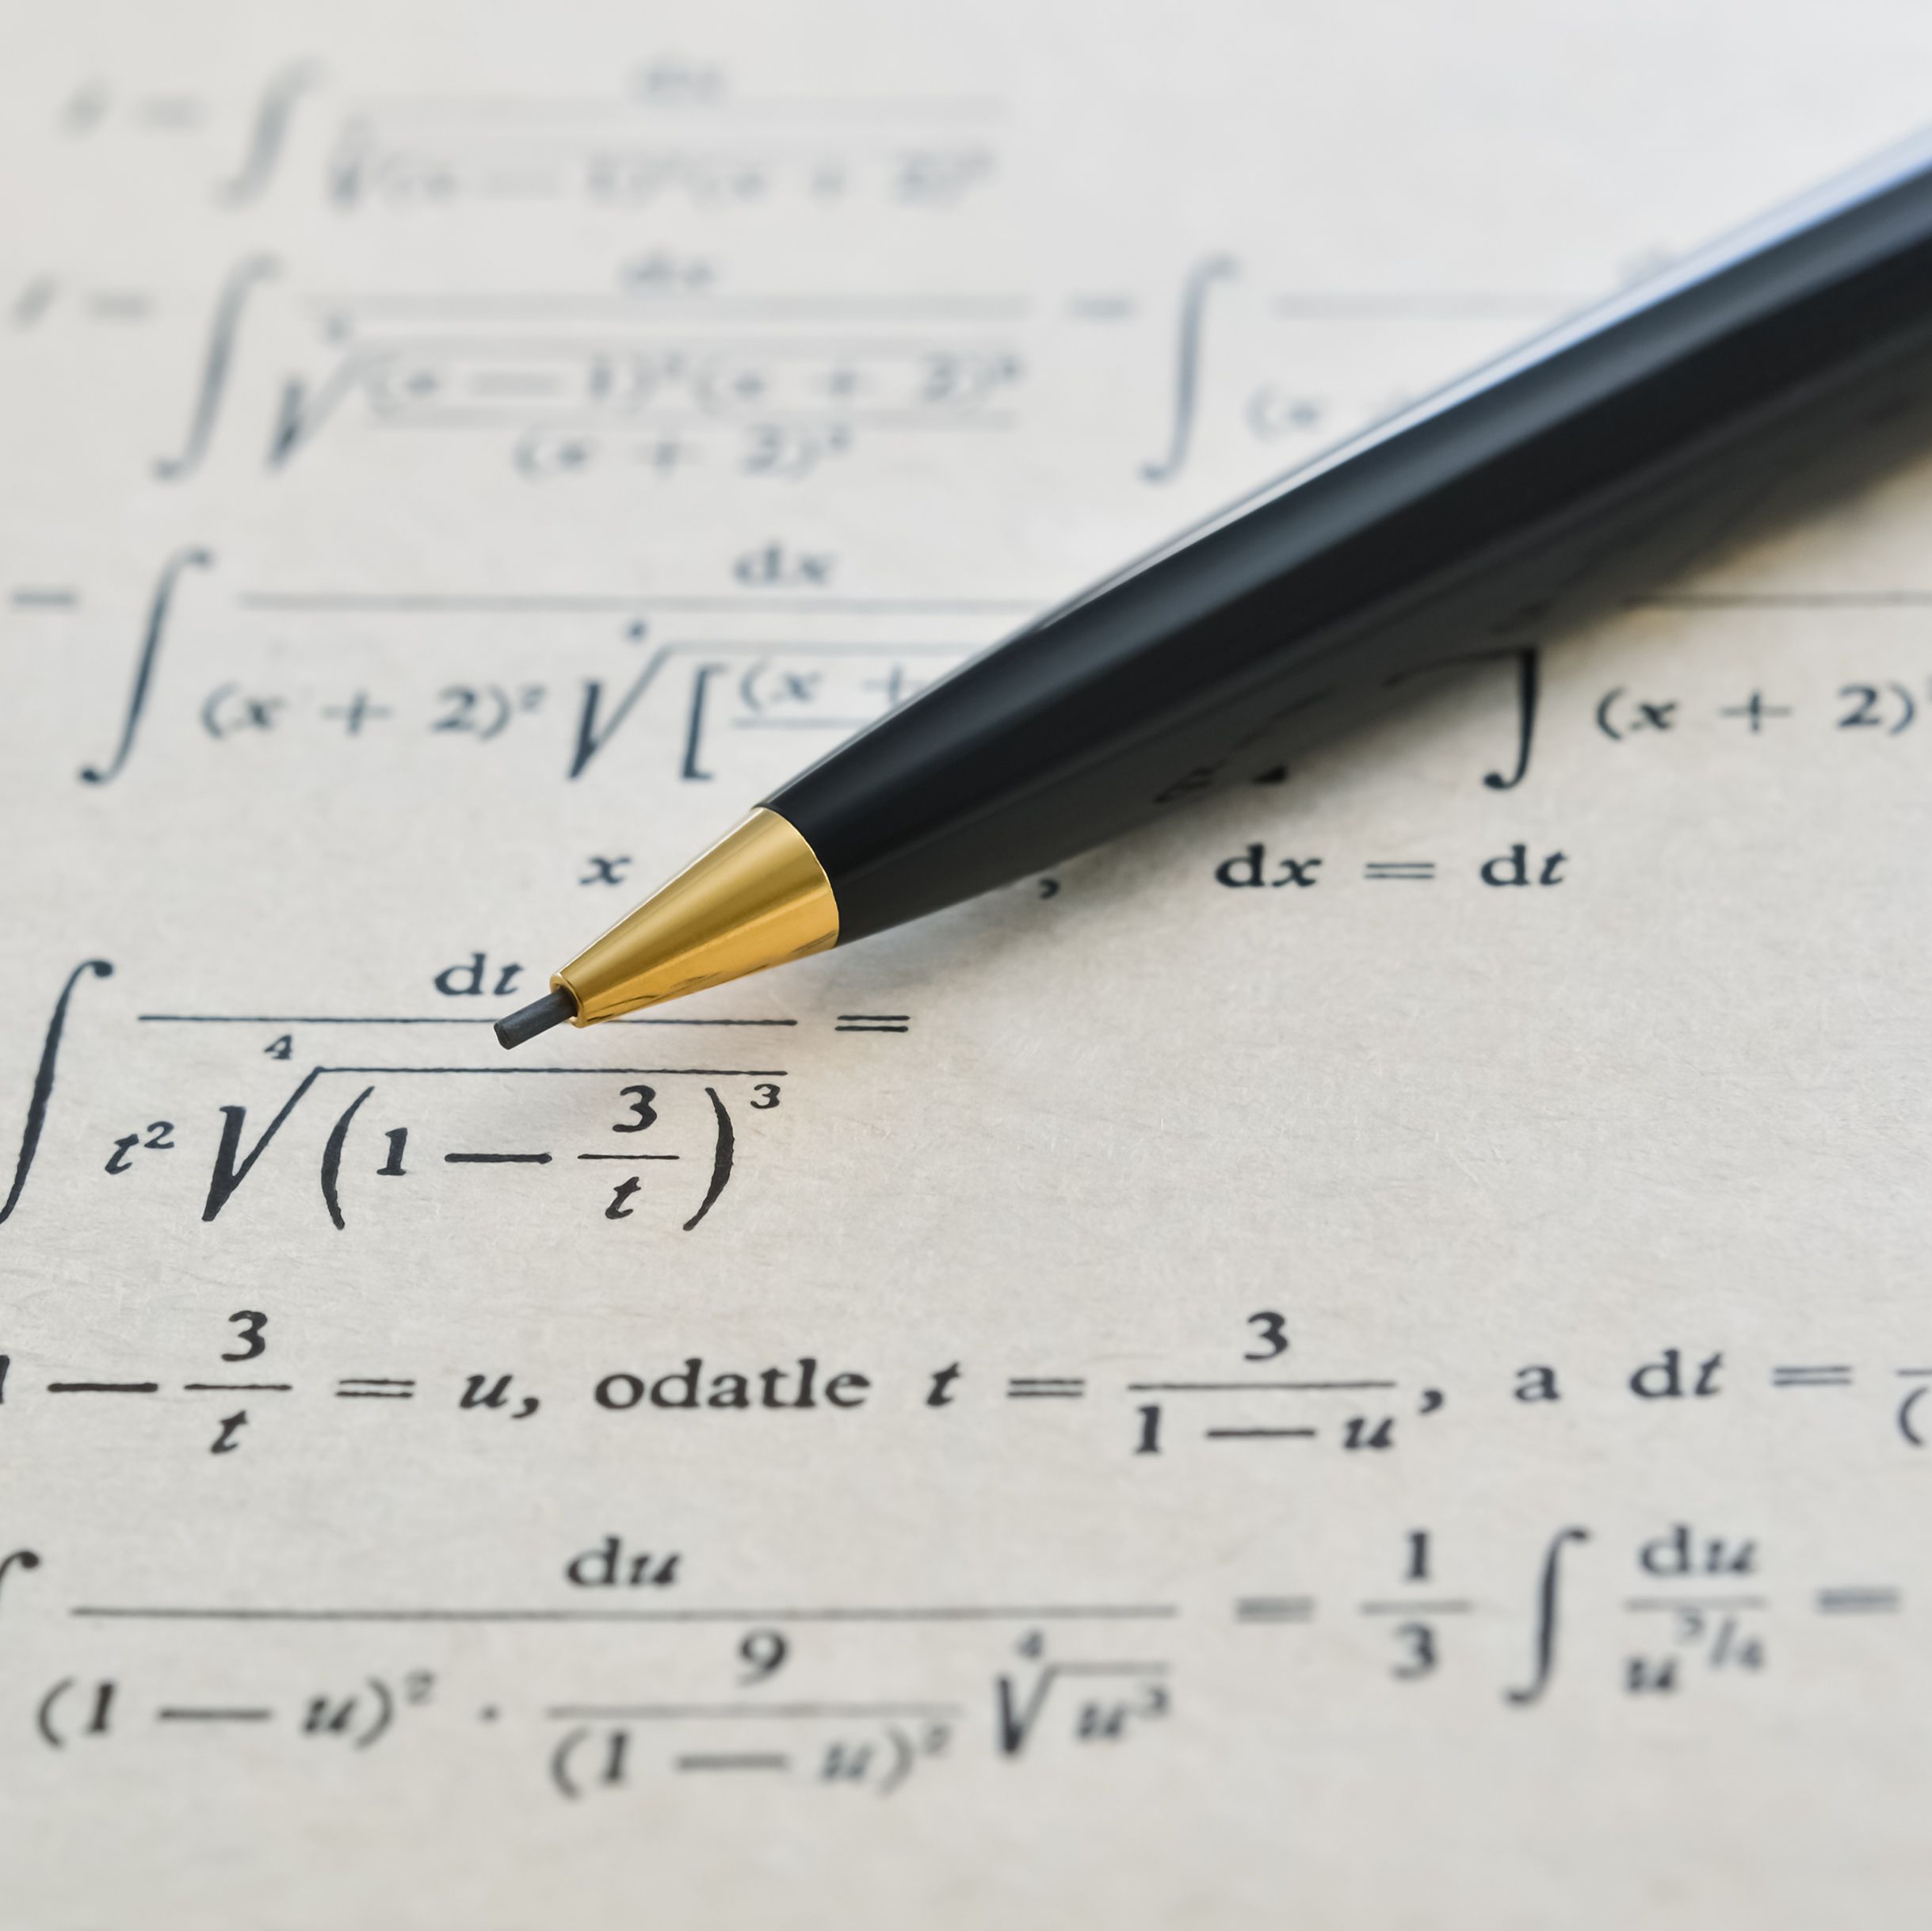 A College Student Just Solved a Notoriously Impossible Math Problem